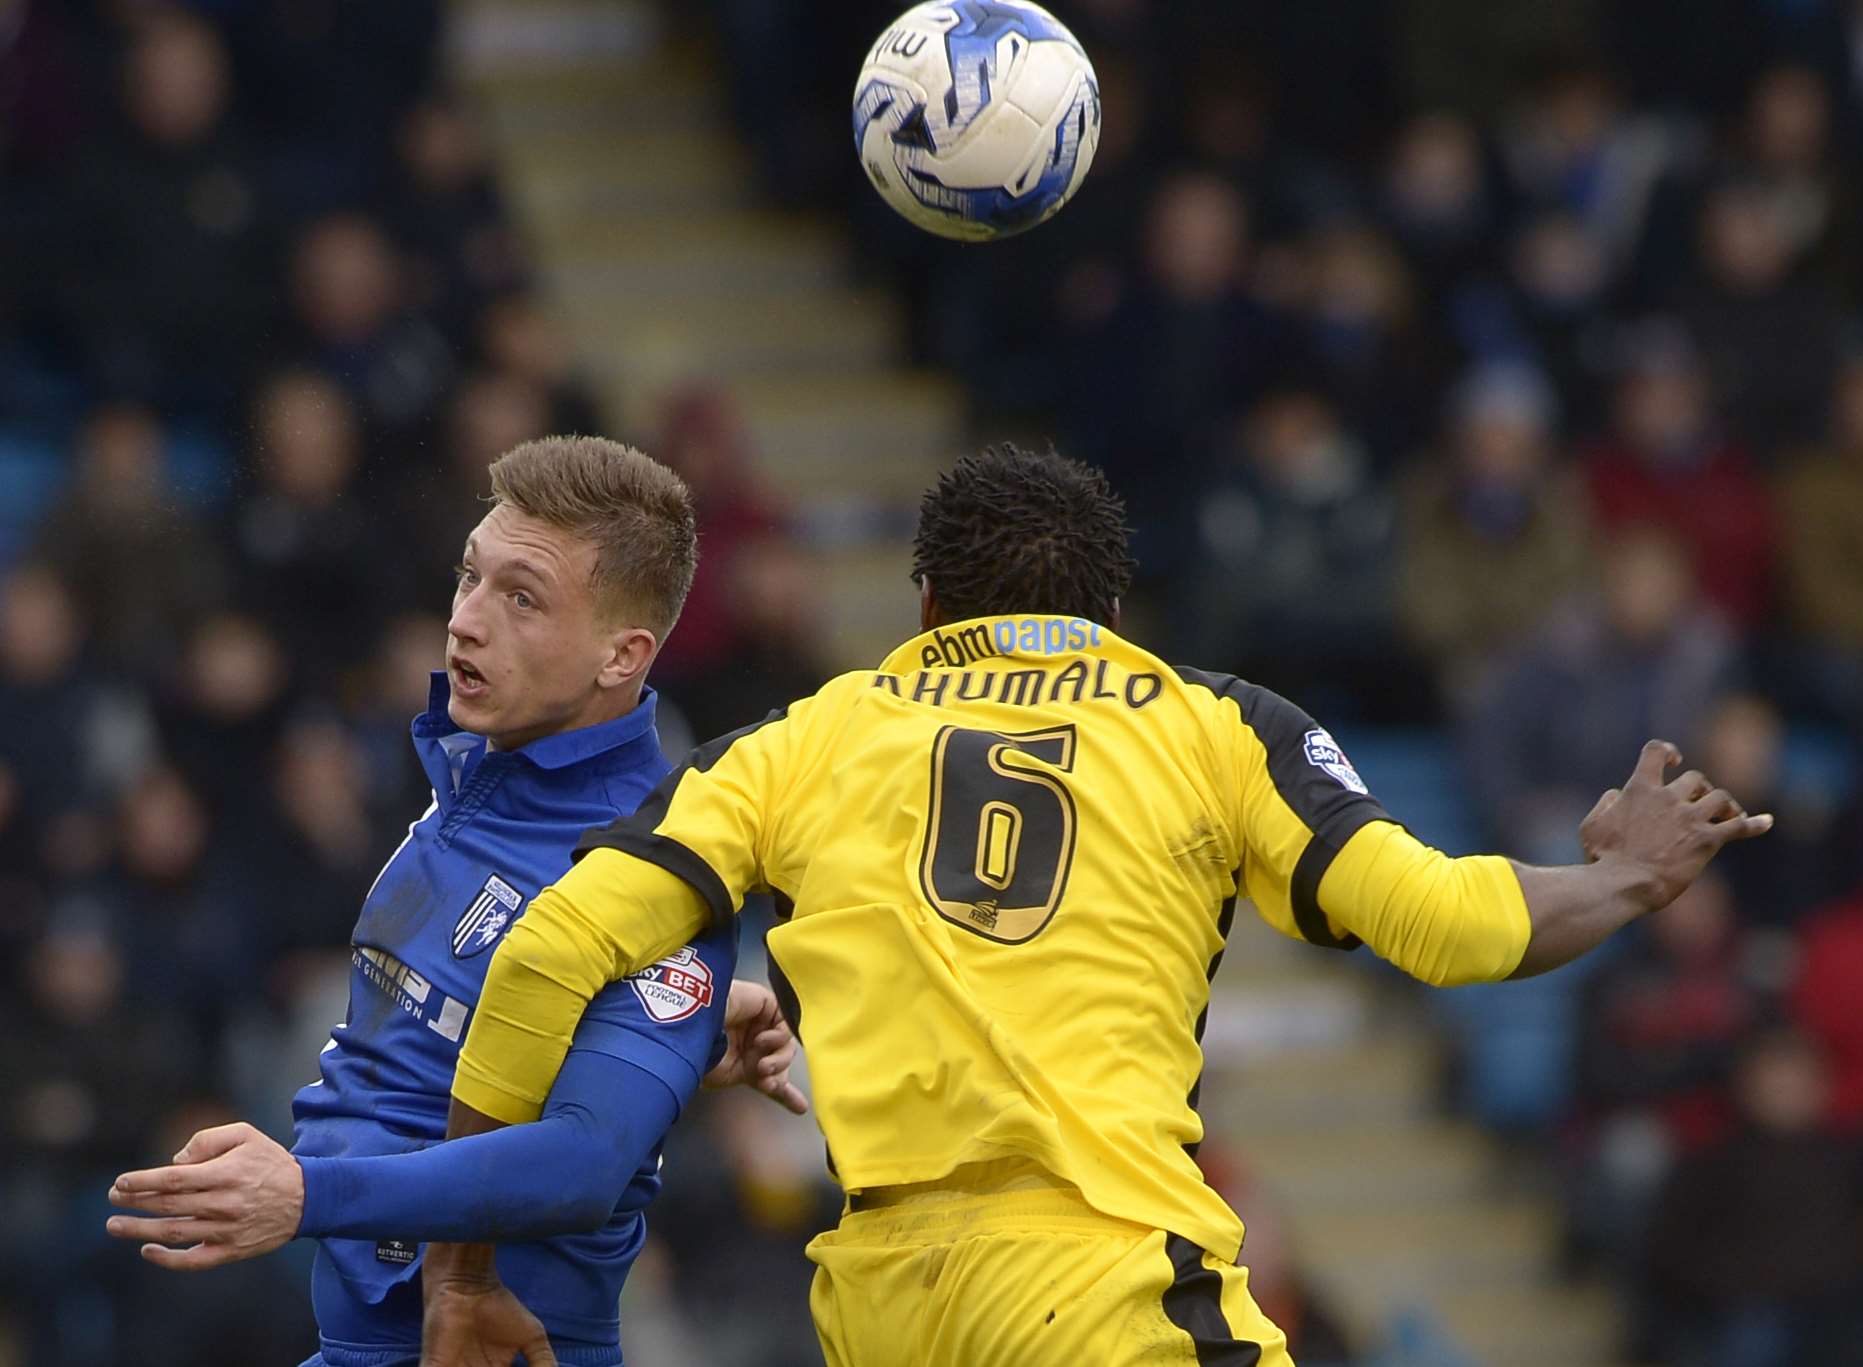 Luke Norris challenges with Colchester's Bongani Khumalo on Saturday. Picture: Barry Goodwin